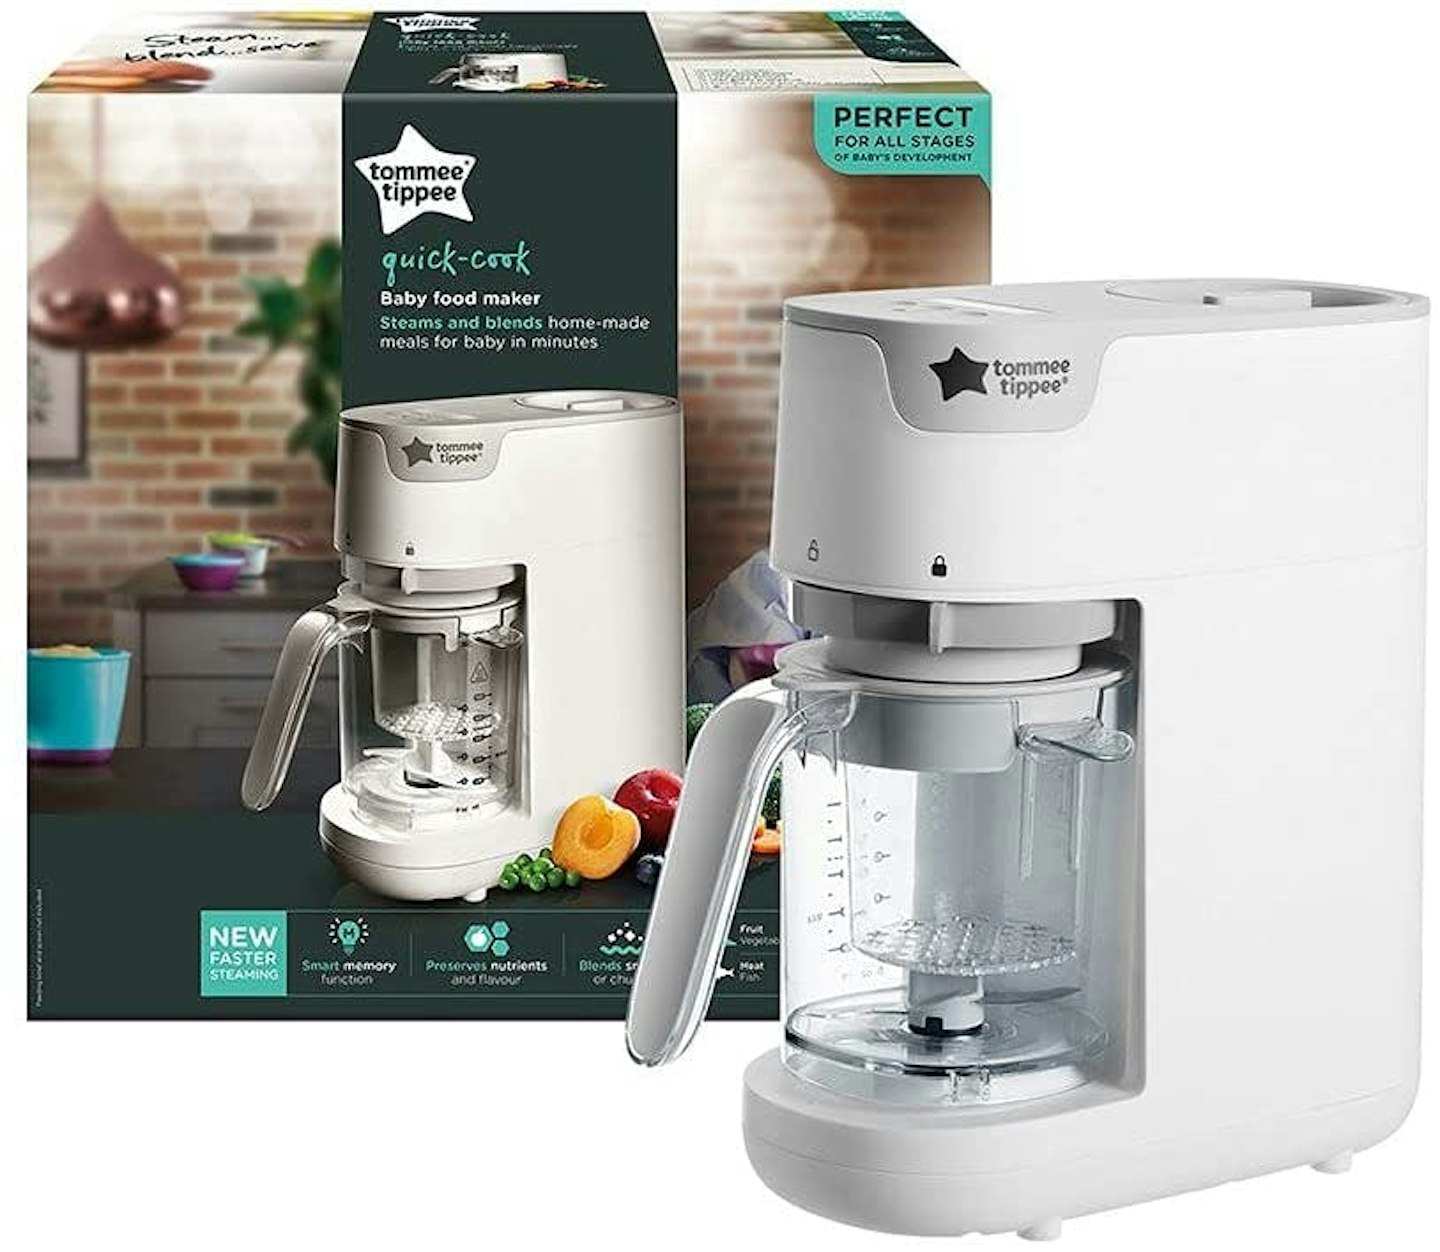 The best baby food makers and blenders